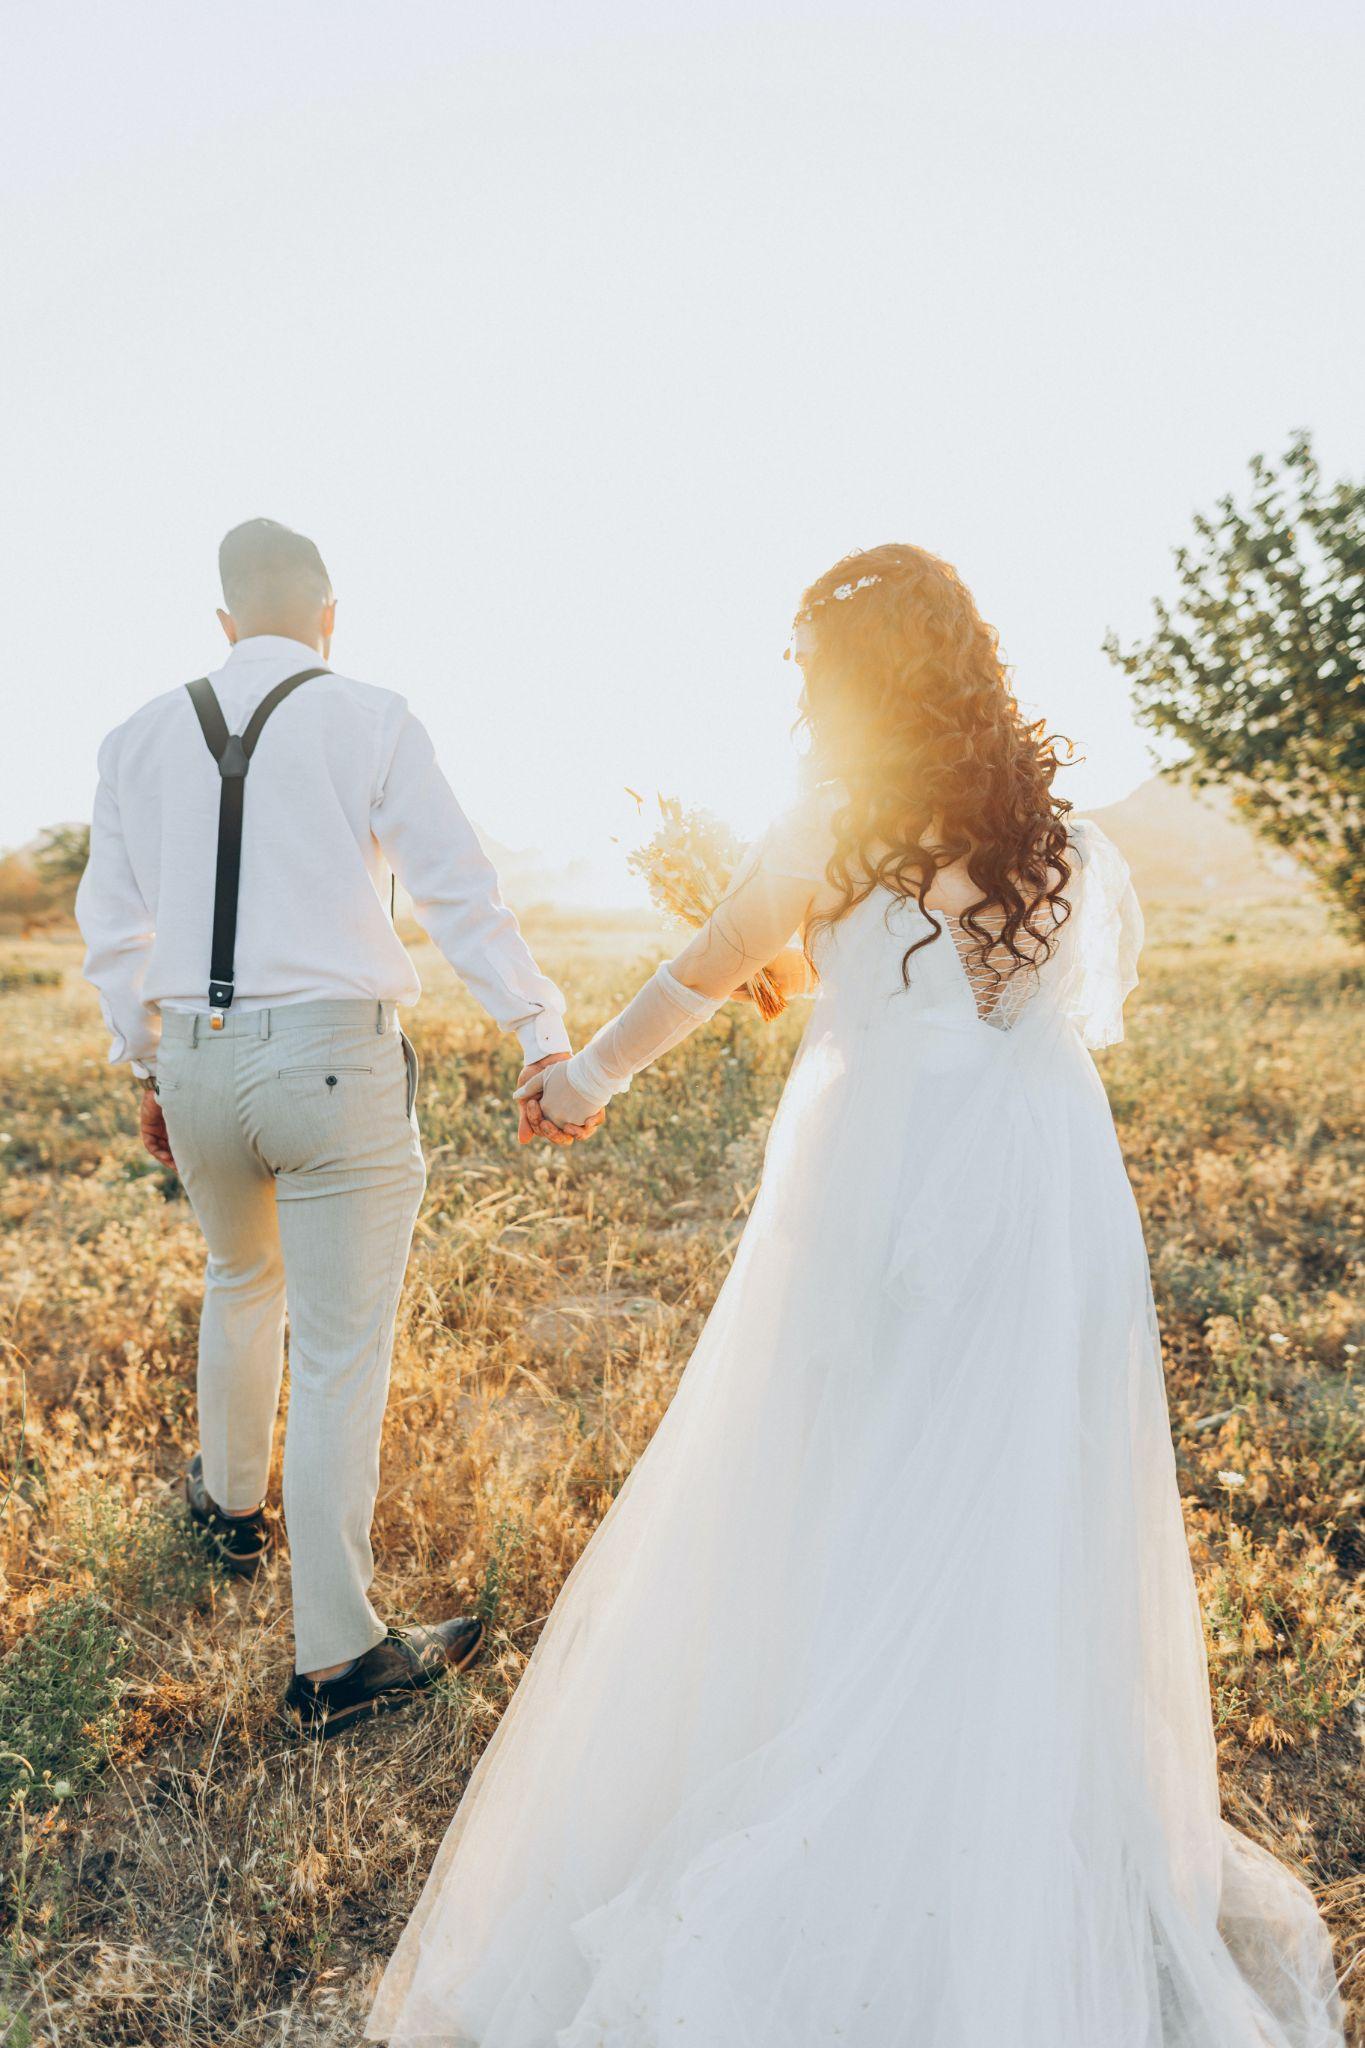 Tips for Stunning Wedding Photography and Videography